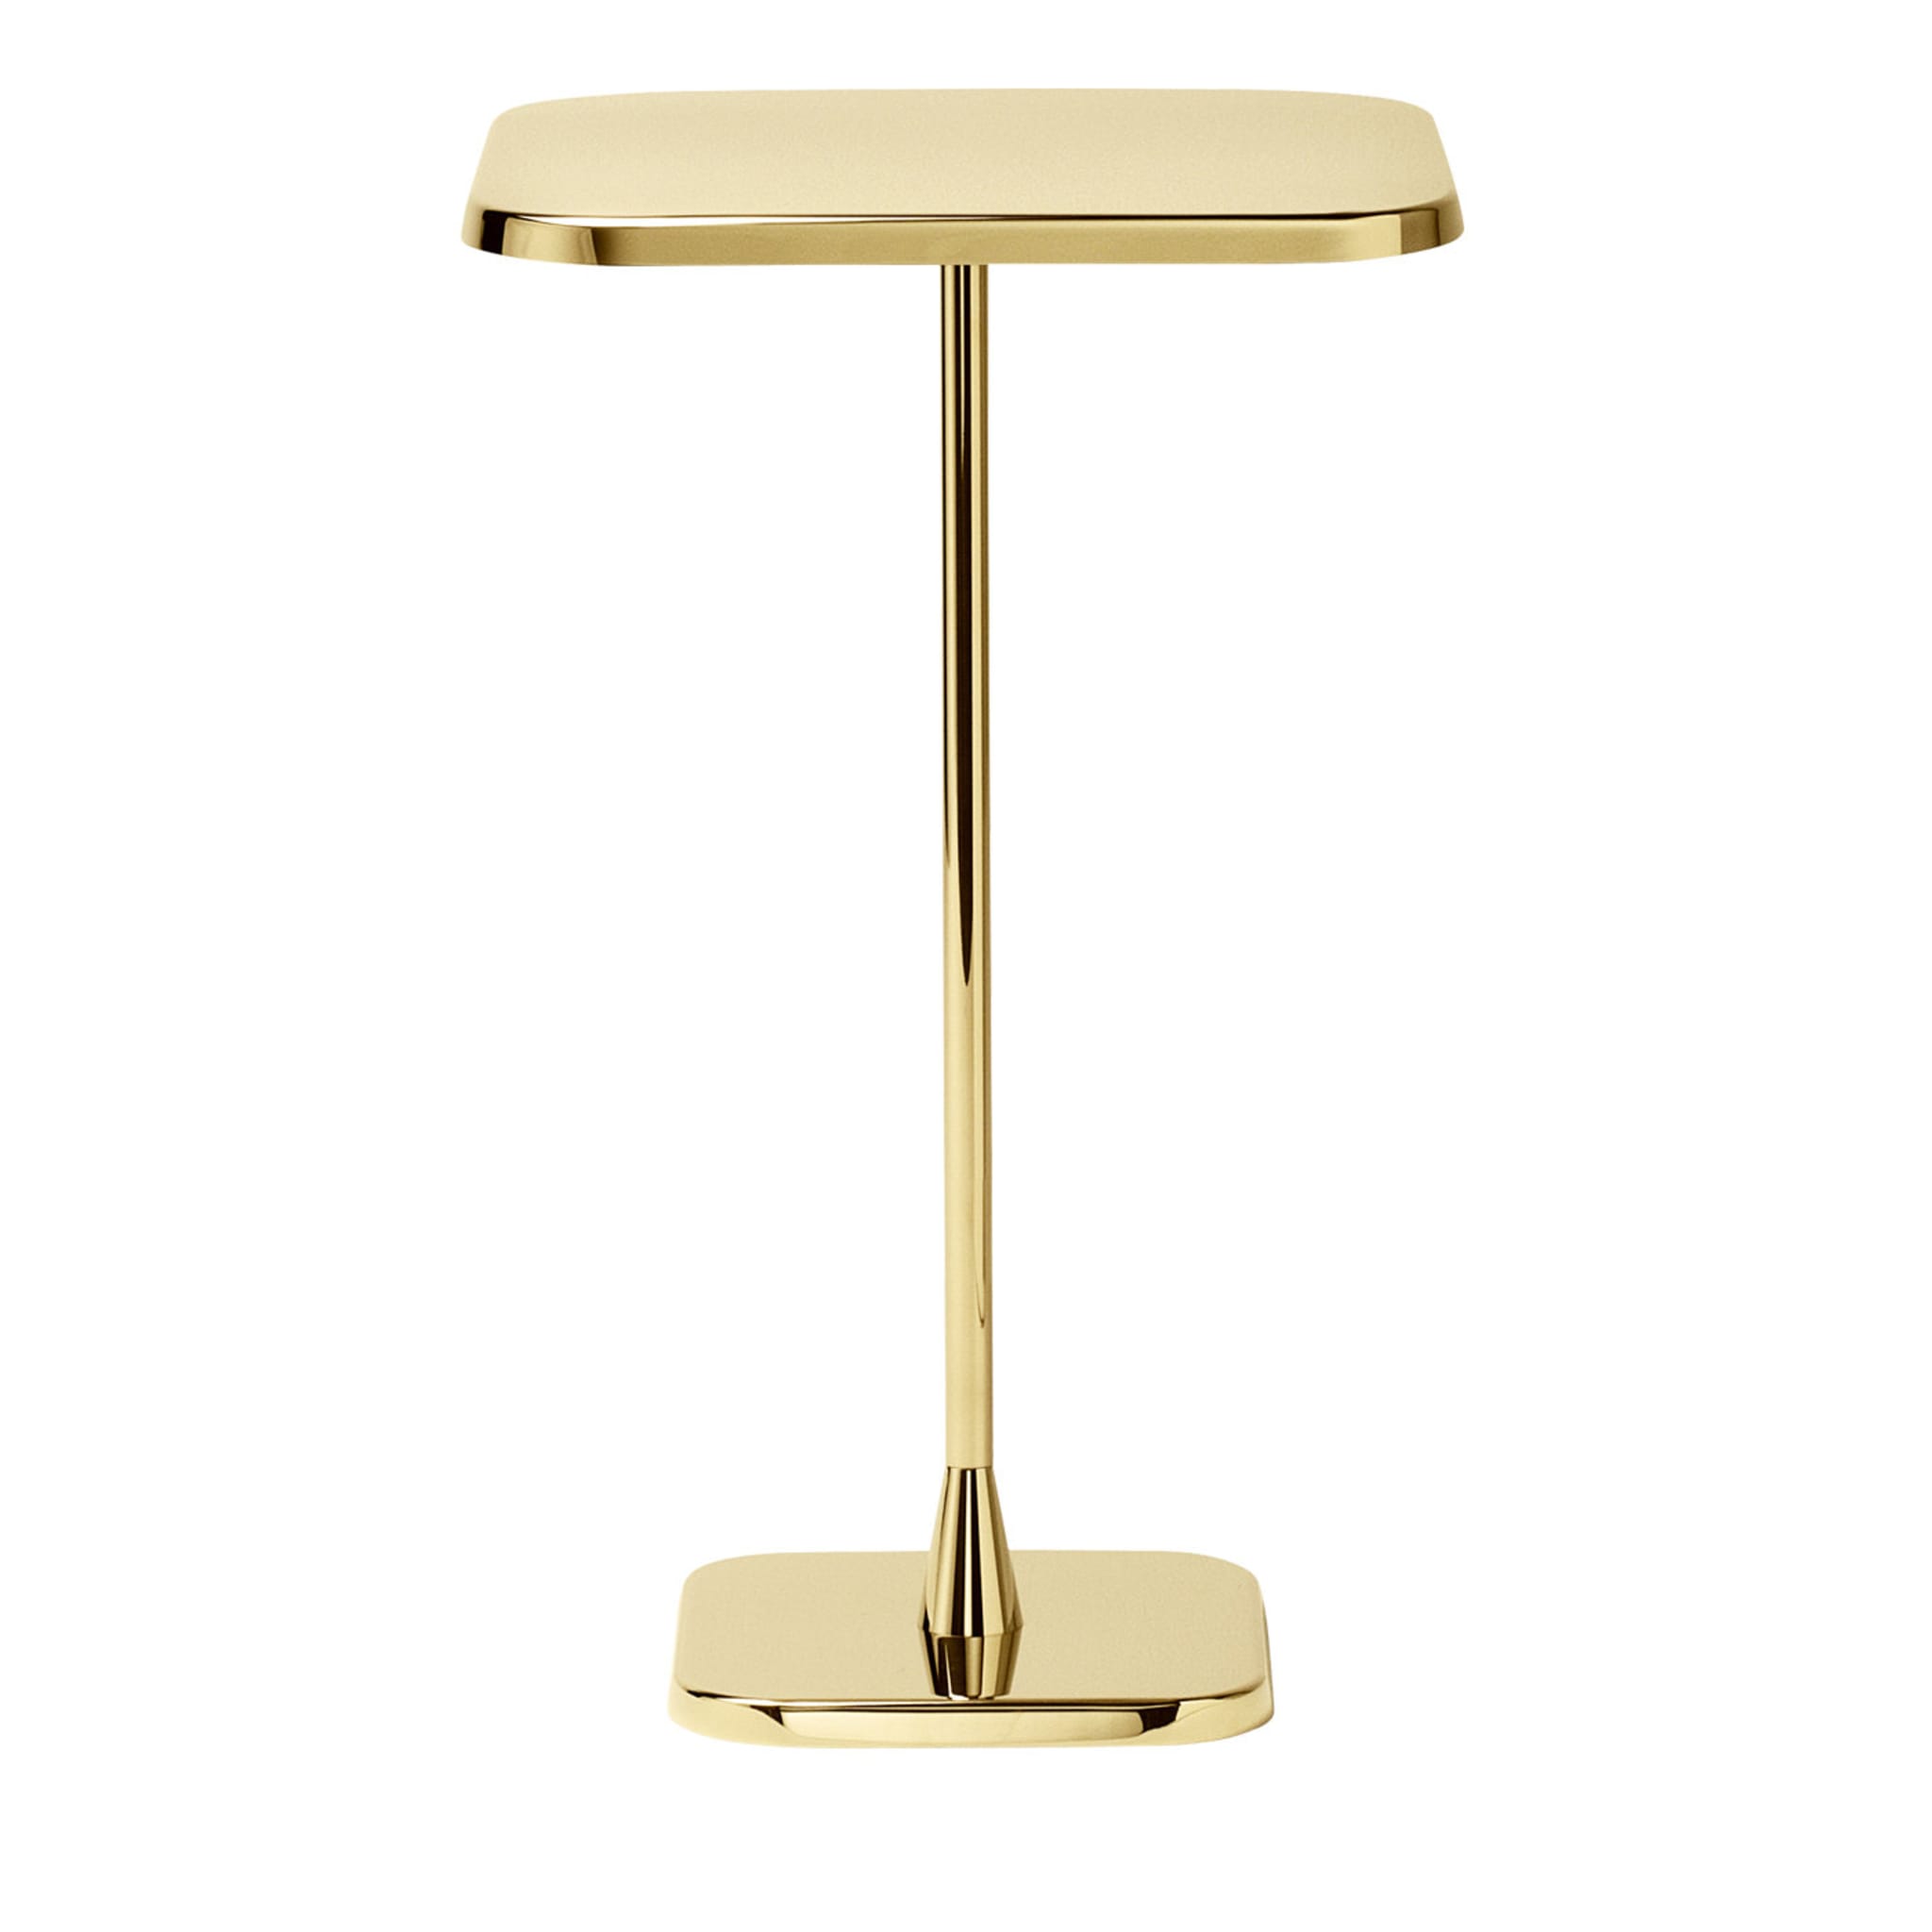 Opera Squared Table Gold By Richard Hutten - Main view